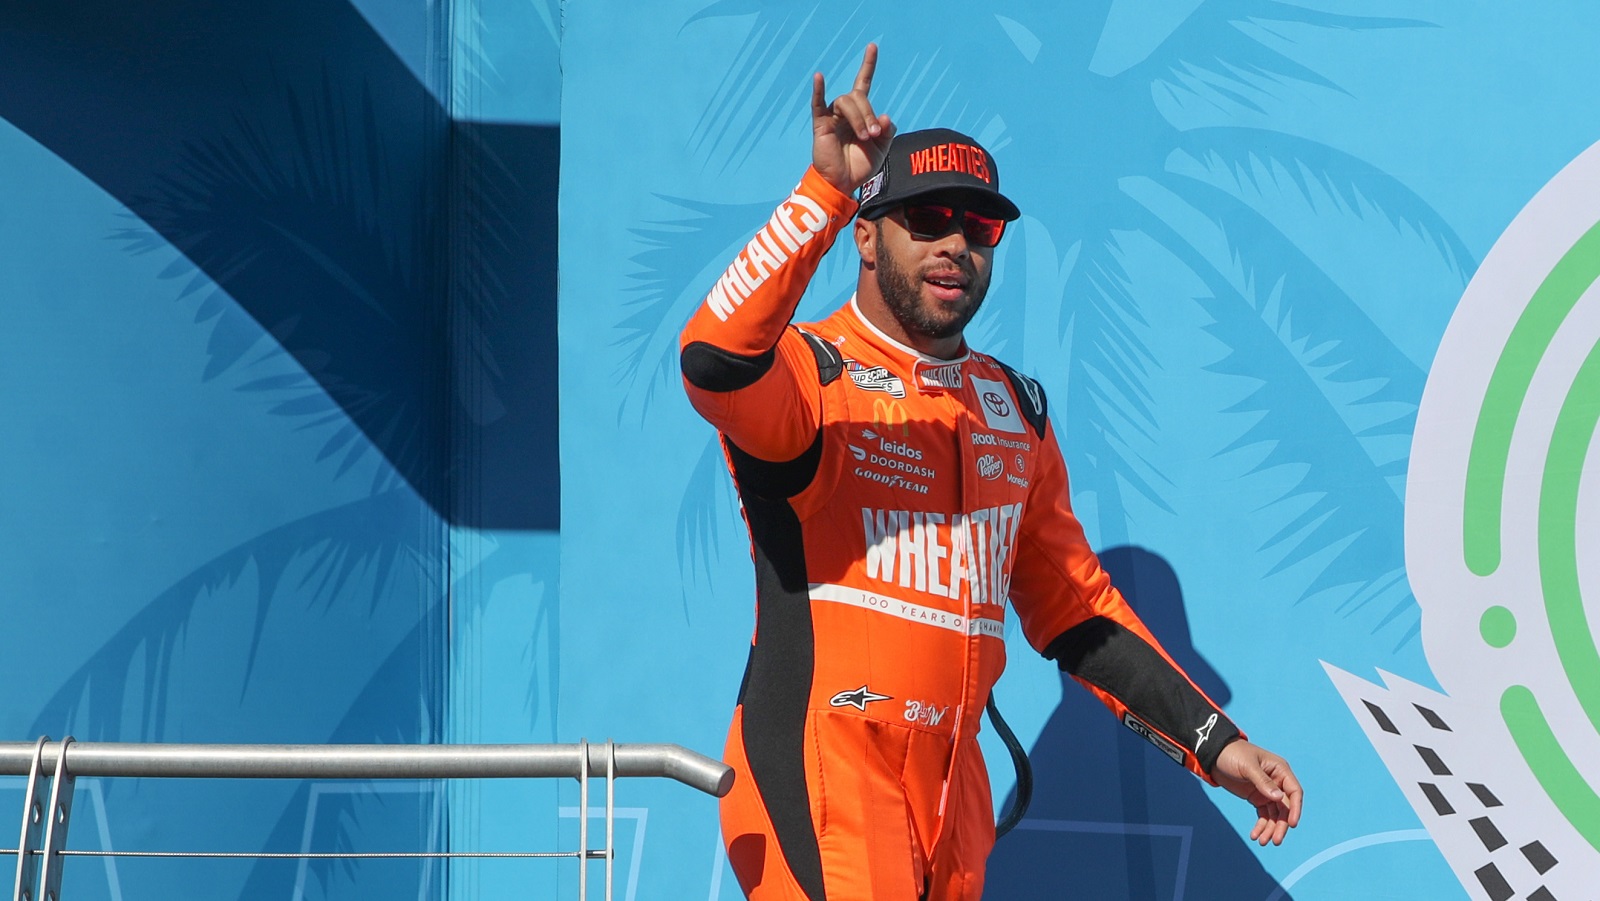 Bubba Wallace waves to fans as he walks onstage during driver intros for the NASCAR Cup Series Wise Power 400 at Auto Club Speedway on Feb. 27, 2022 in Fontana, California. | Meg Oliphant/Getty Images